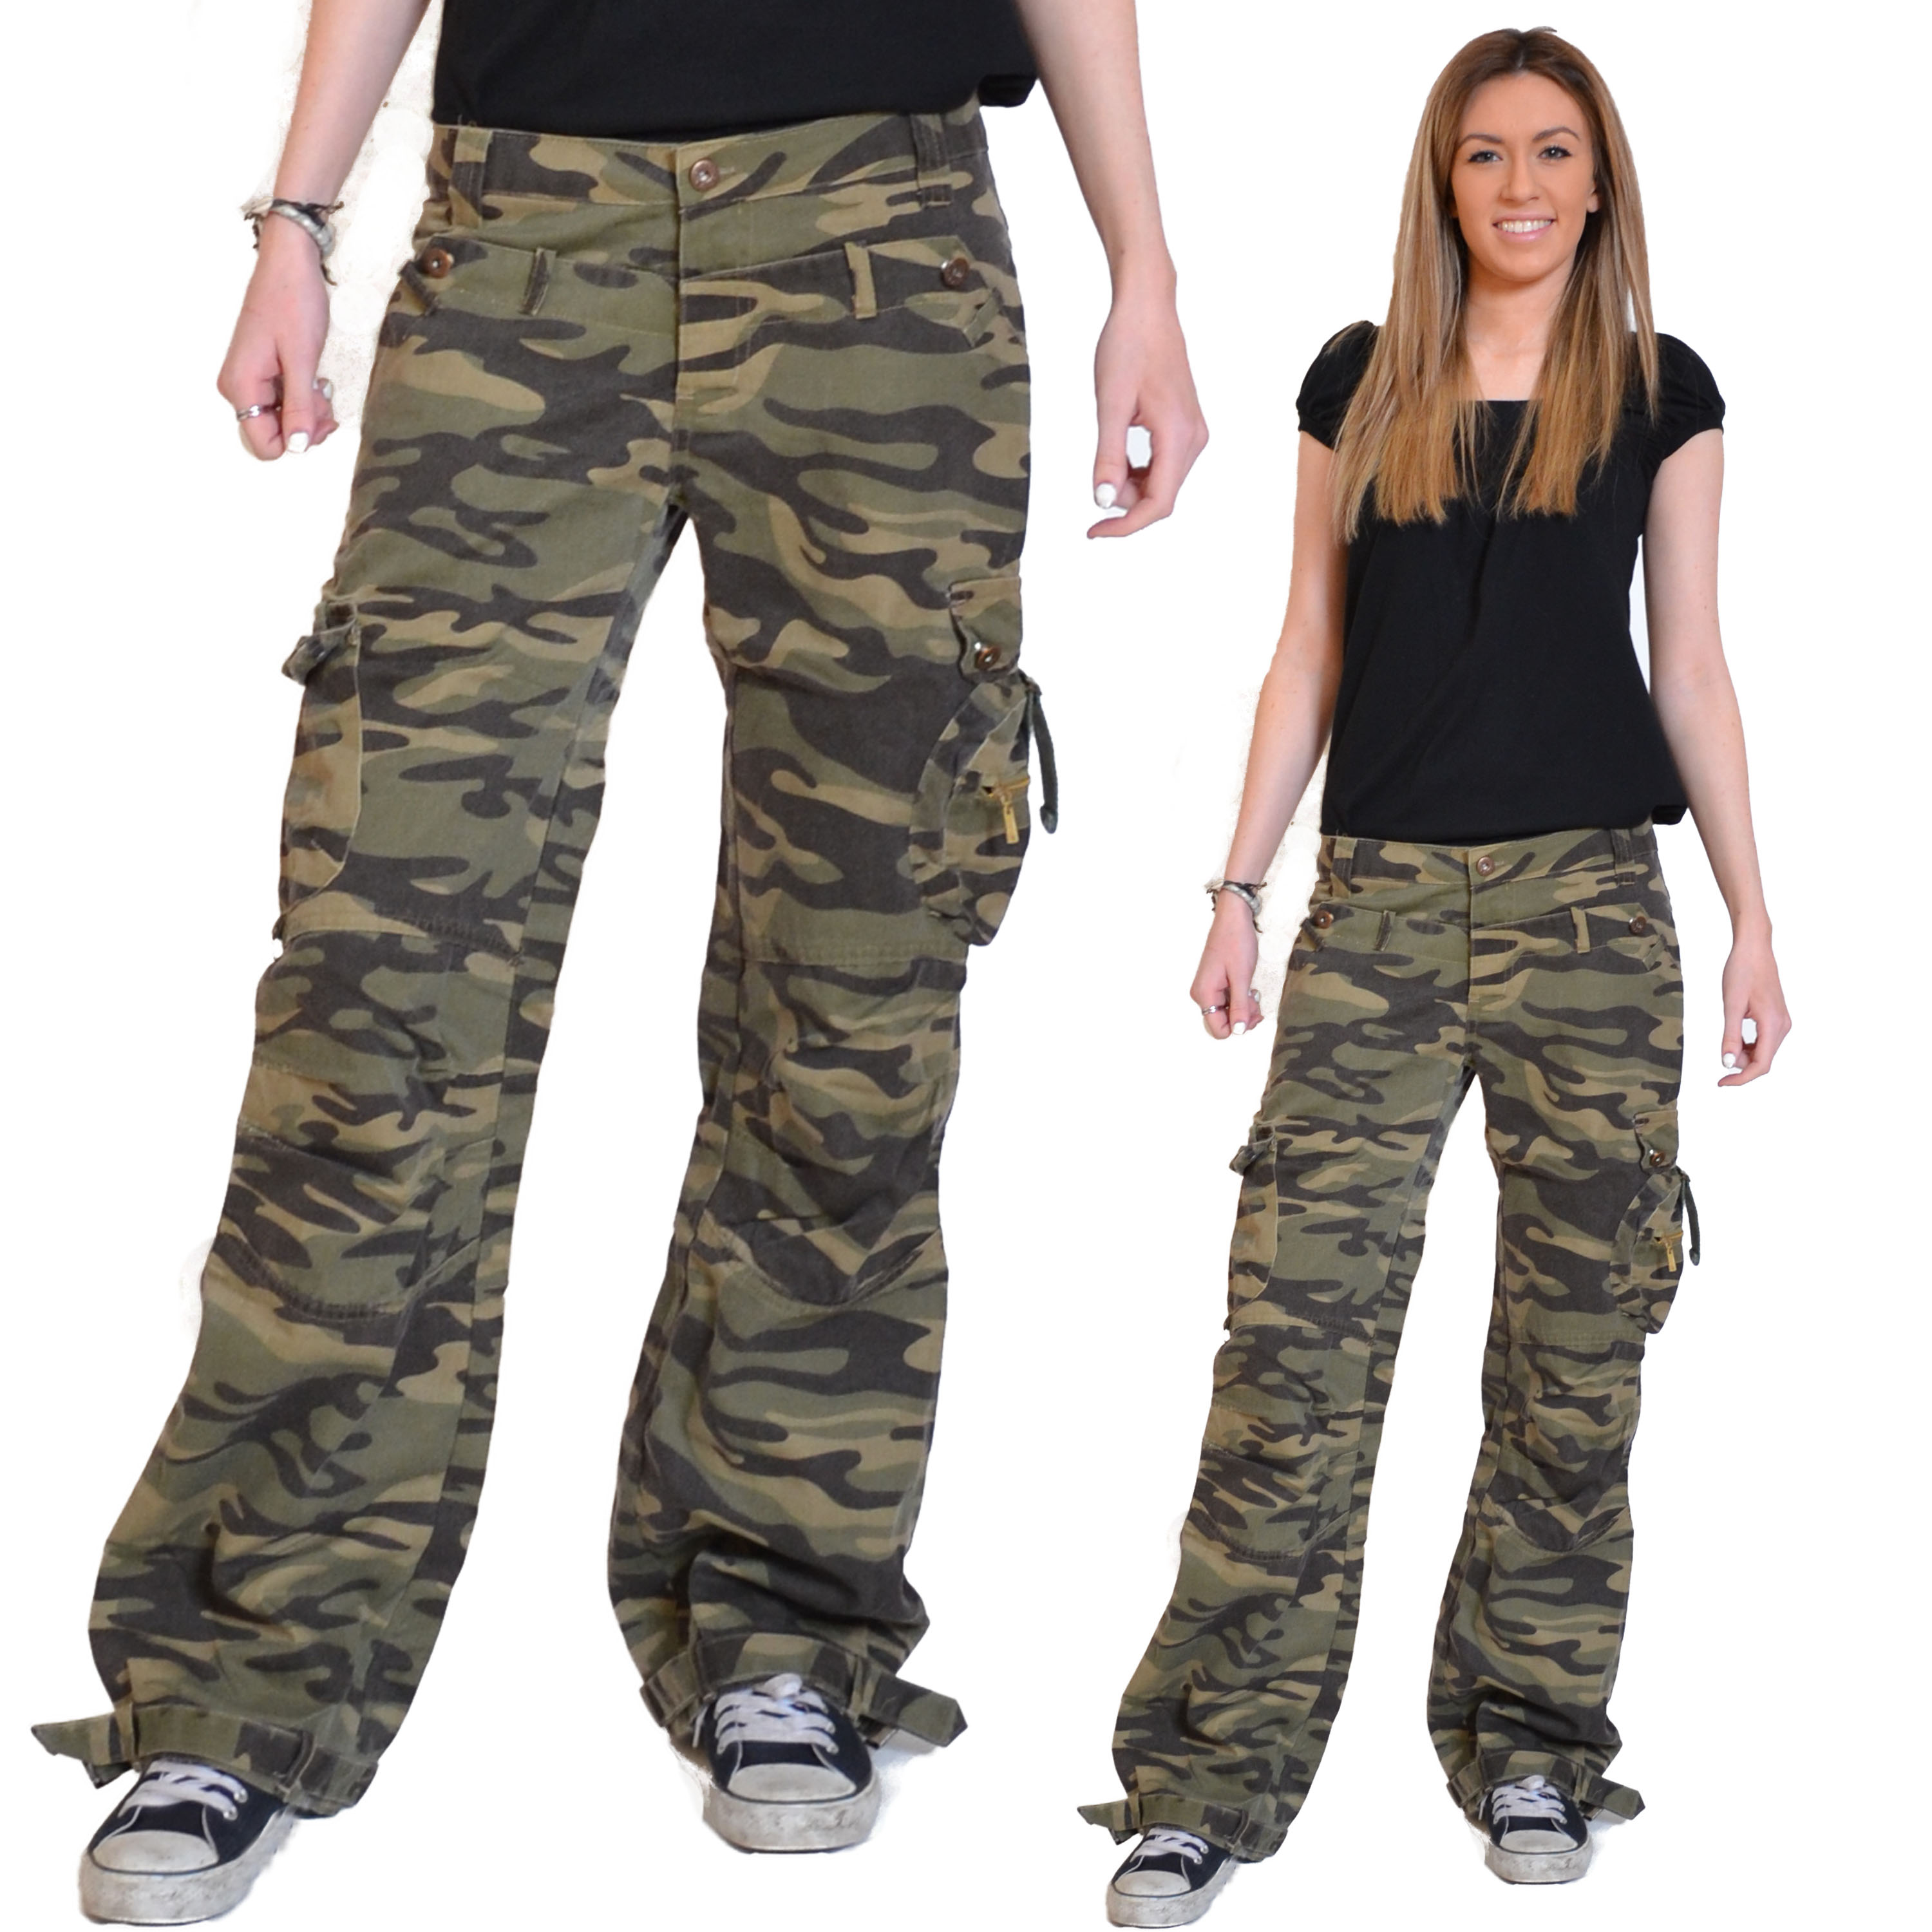 Women's Army Cargo Pants - Army Military